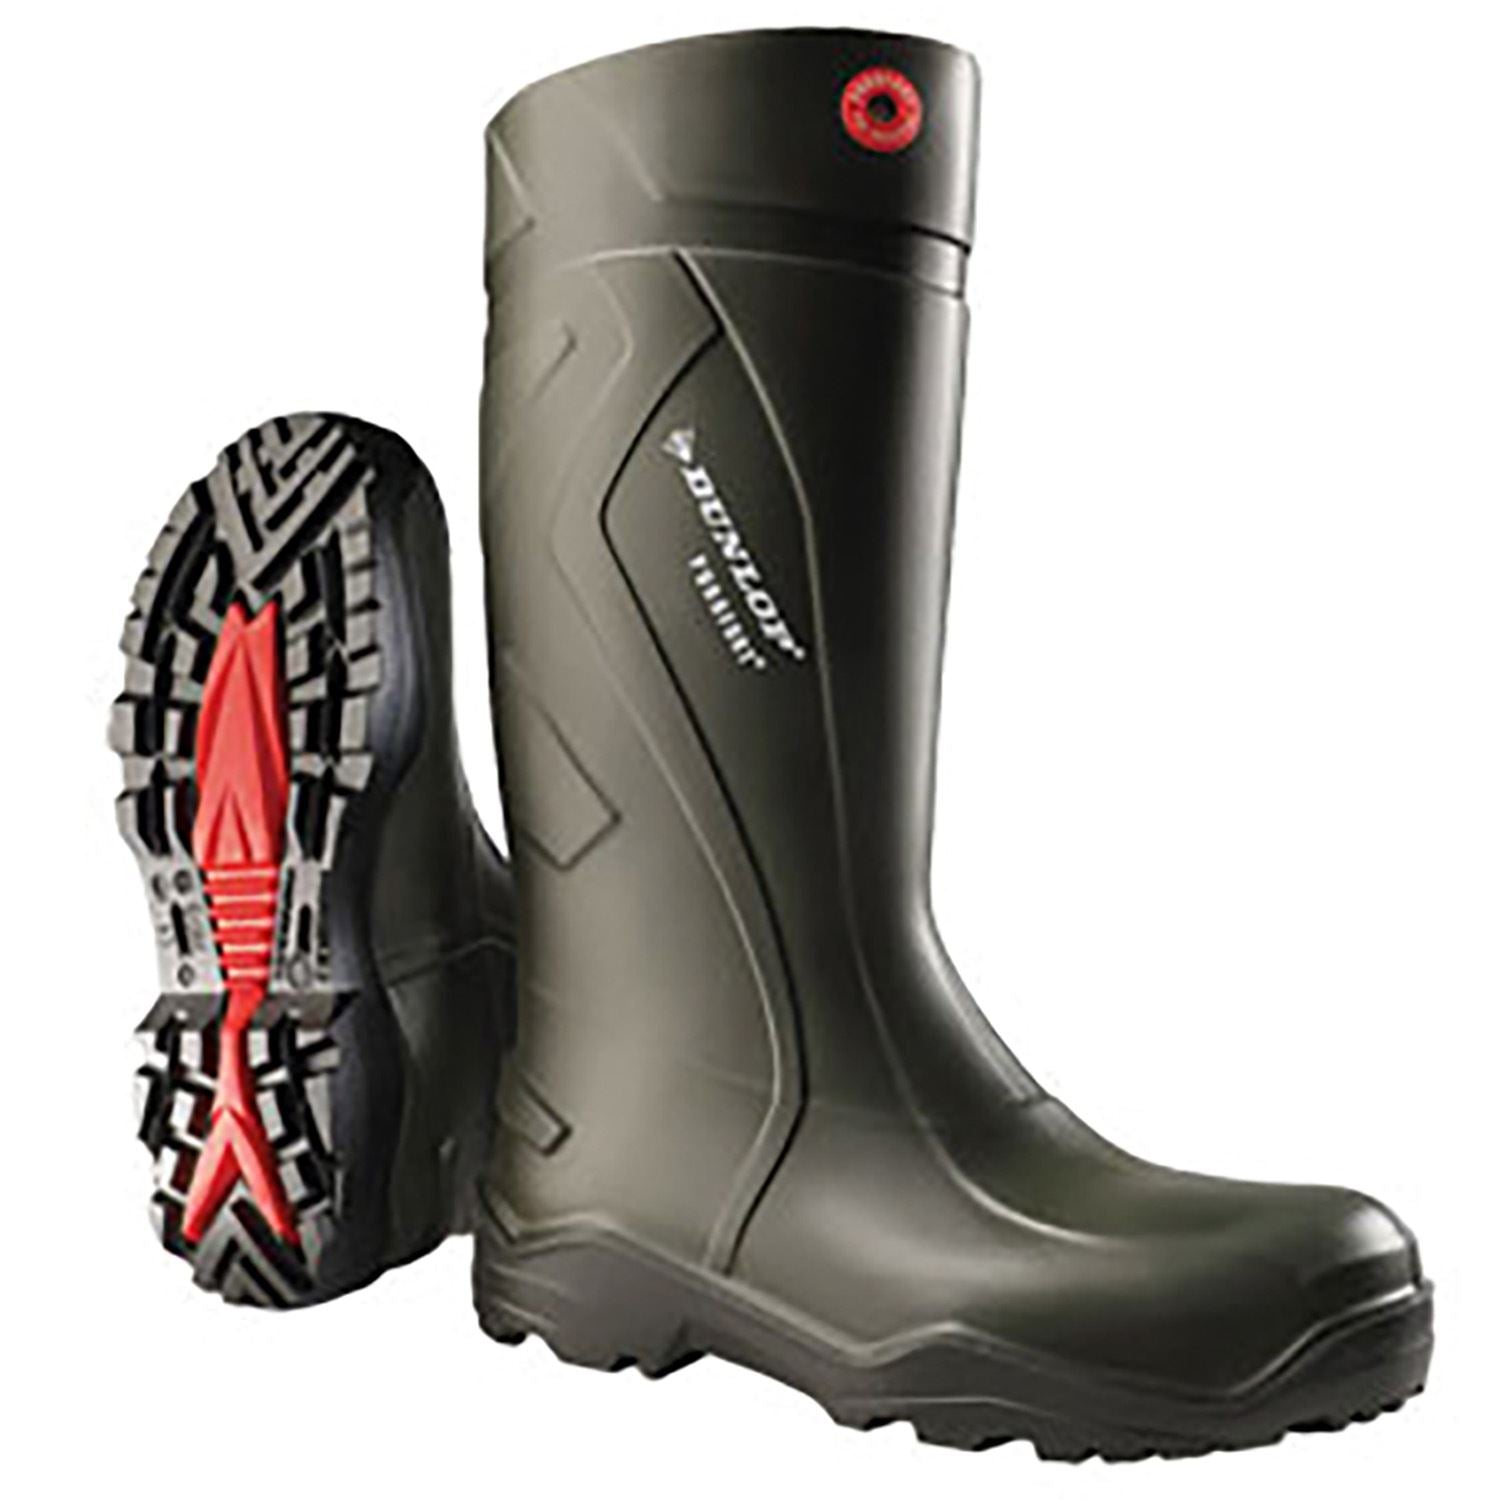 Dunlop Purofort Plus Full Safety - Just Horse Riders